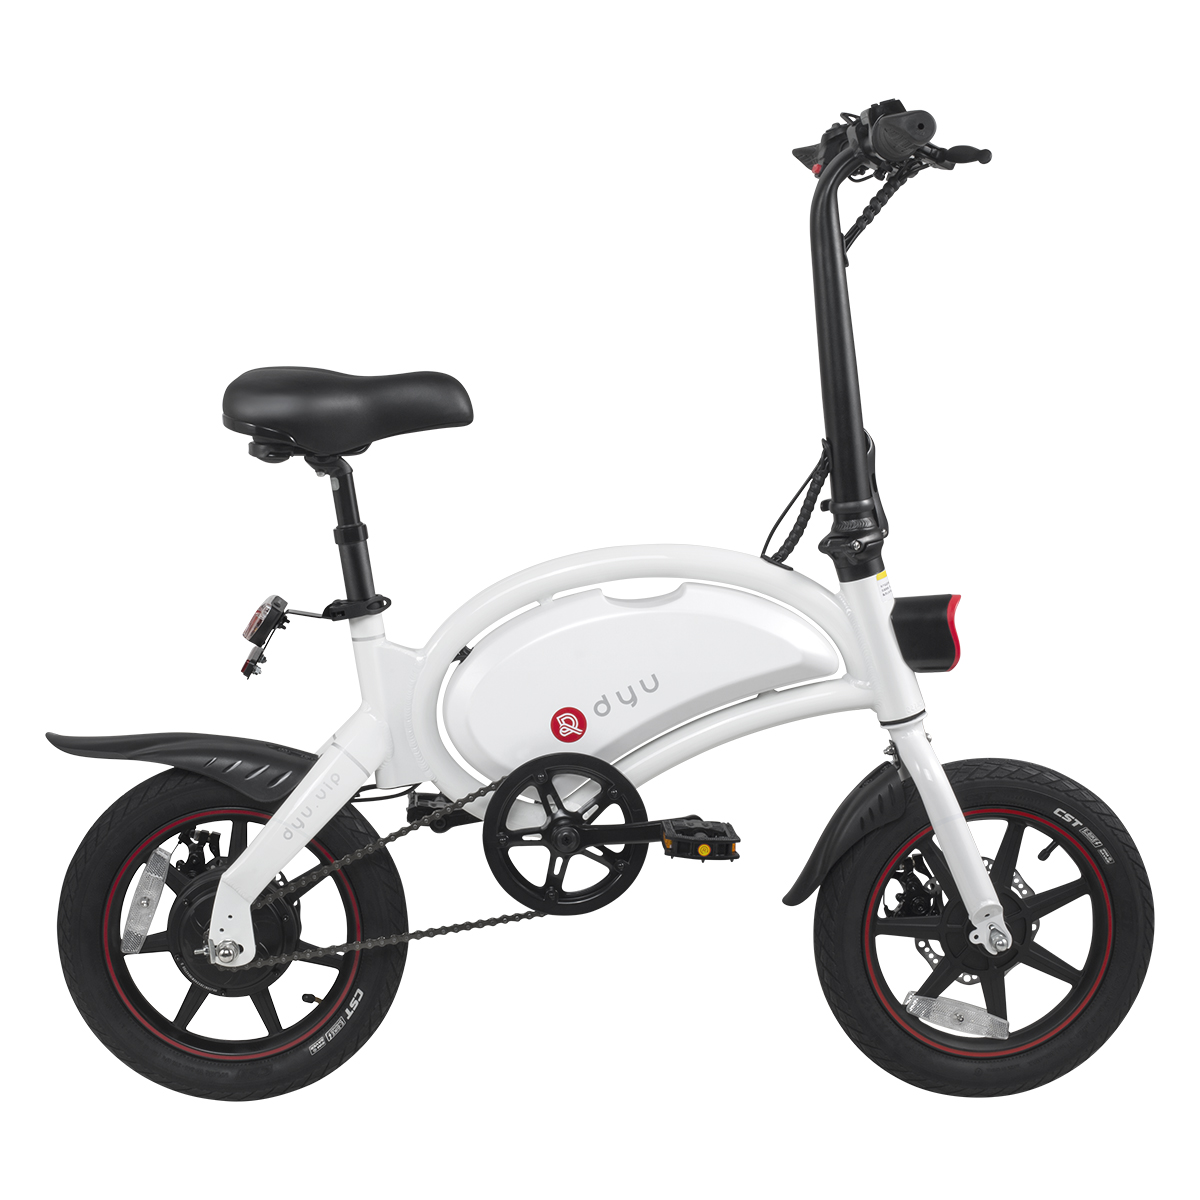 Find EU Direct DYU D3 10Ah 240W 36V Folding Moped Electric Bike 14inch 25km/h Top Speed 70km Mileage Intelligent Double Brake System Max Load 120kg White for Sale on Gipsybee.com with cryptocurrencies